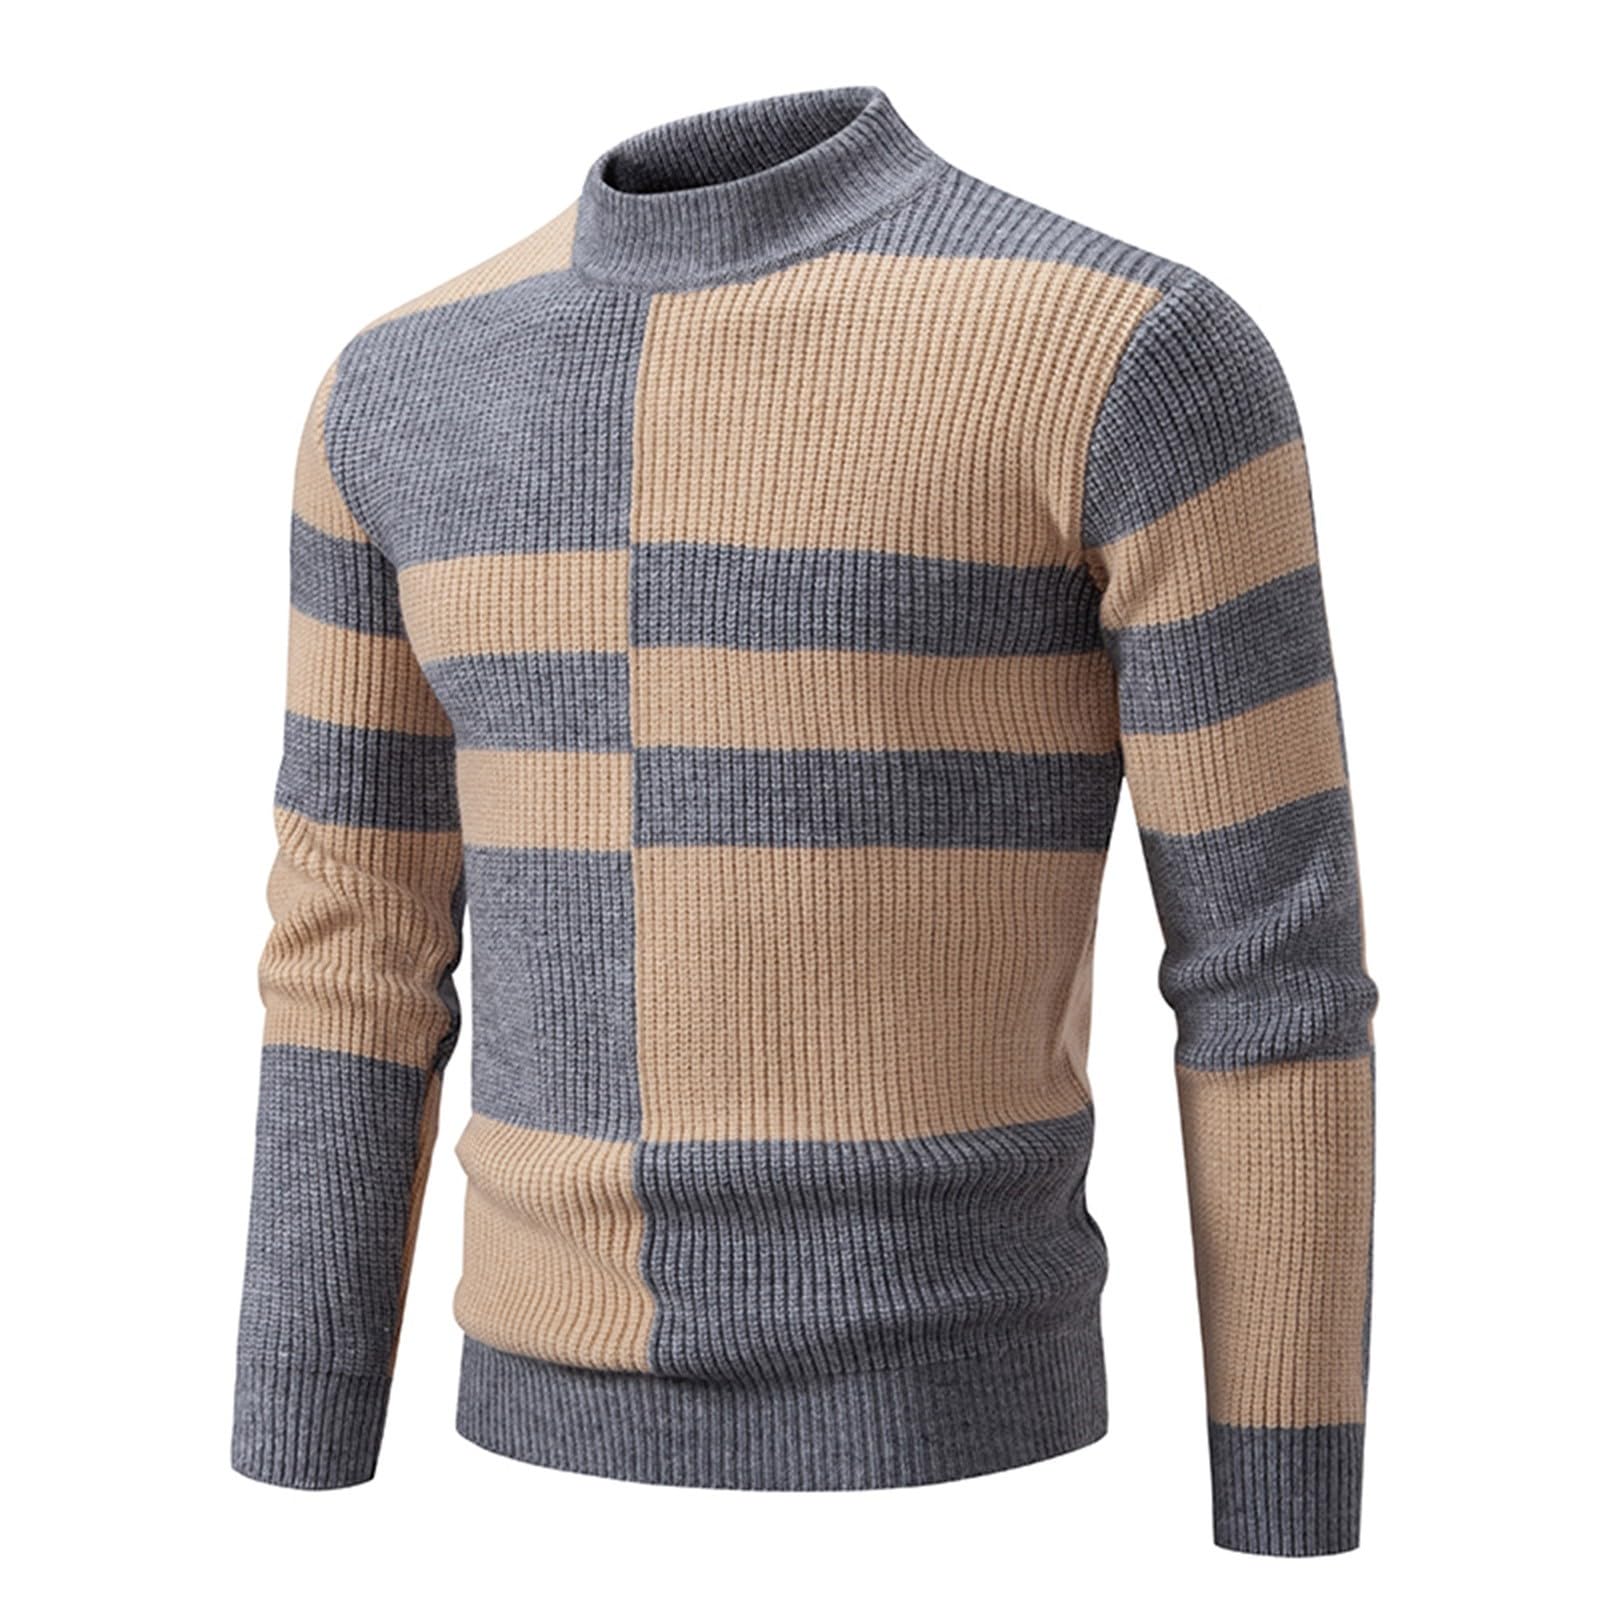 XIAXOGOOL Men's Sweater Crewneck Pullover Long Sleeve Color Block Cable Knit Warm Chunky Winter Jumper Sweaters